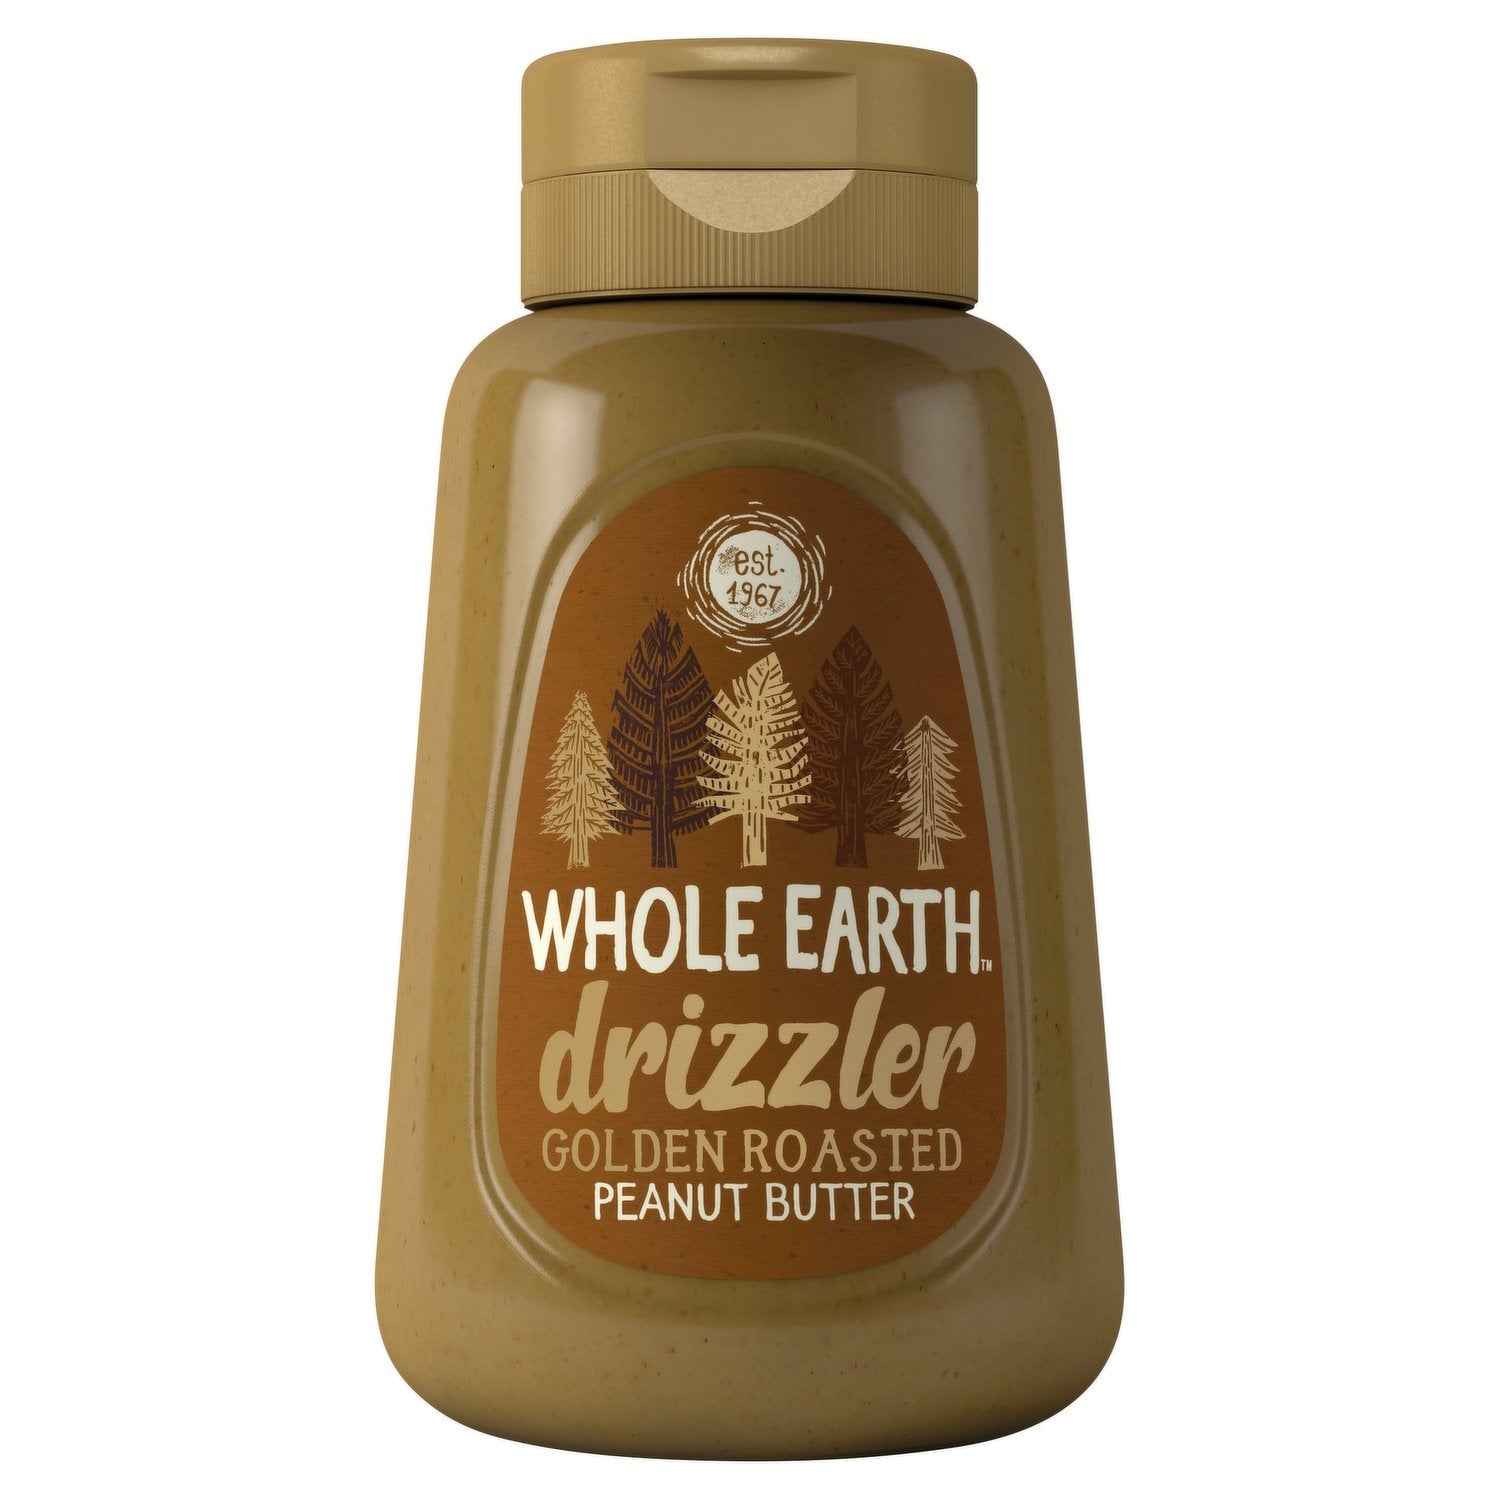 Whole Earth Drizzler Roasted Peanut Butter 320g